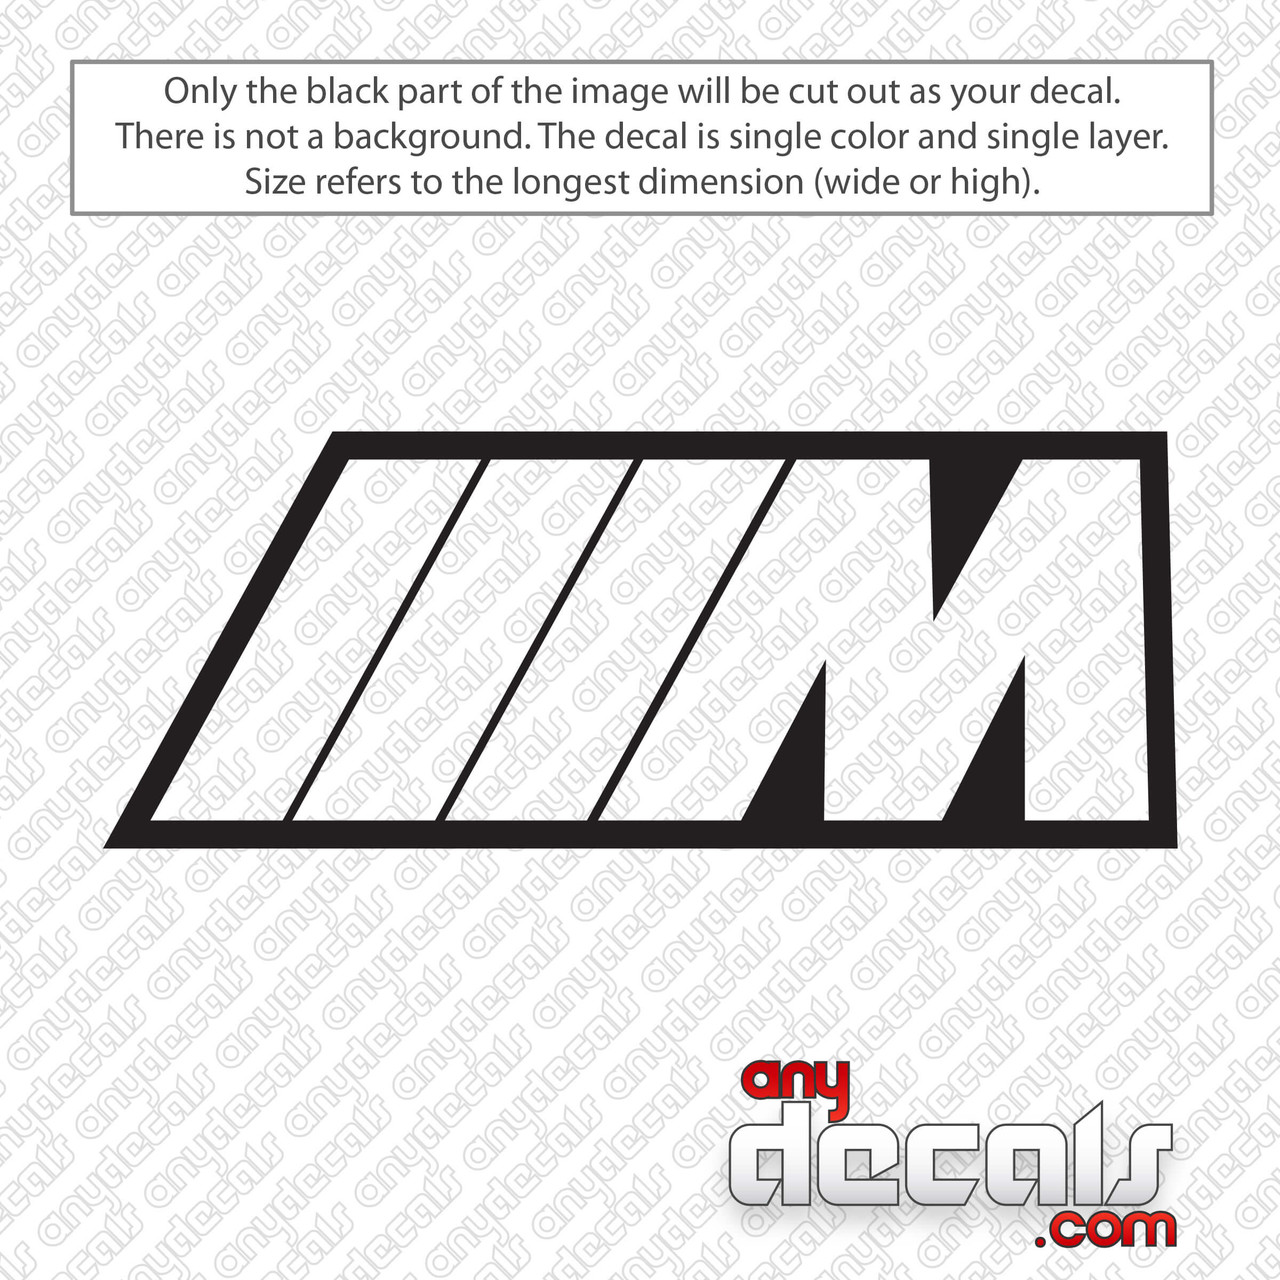 https://cdn11.bigcommerce.com/s-df97c/images/stencil/1280x1280/products/1388/2406/bmw-m-logo-outline-decal-sticker__66148.1609385569.jpg?c=2?imbypass=on